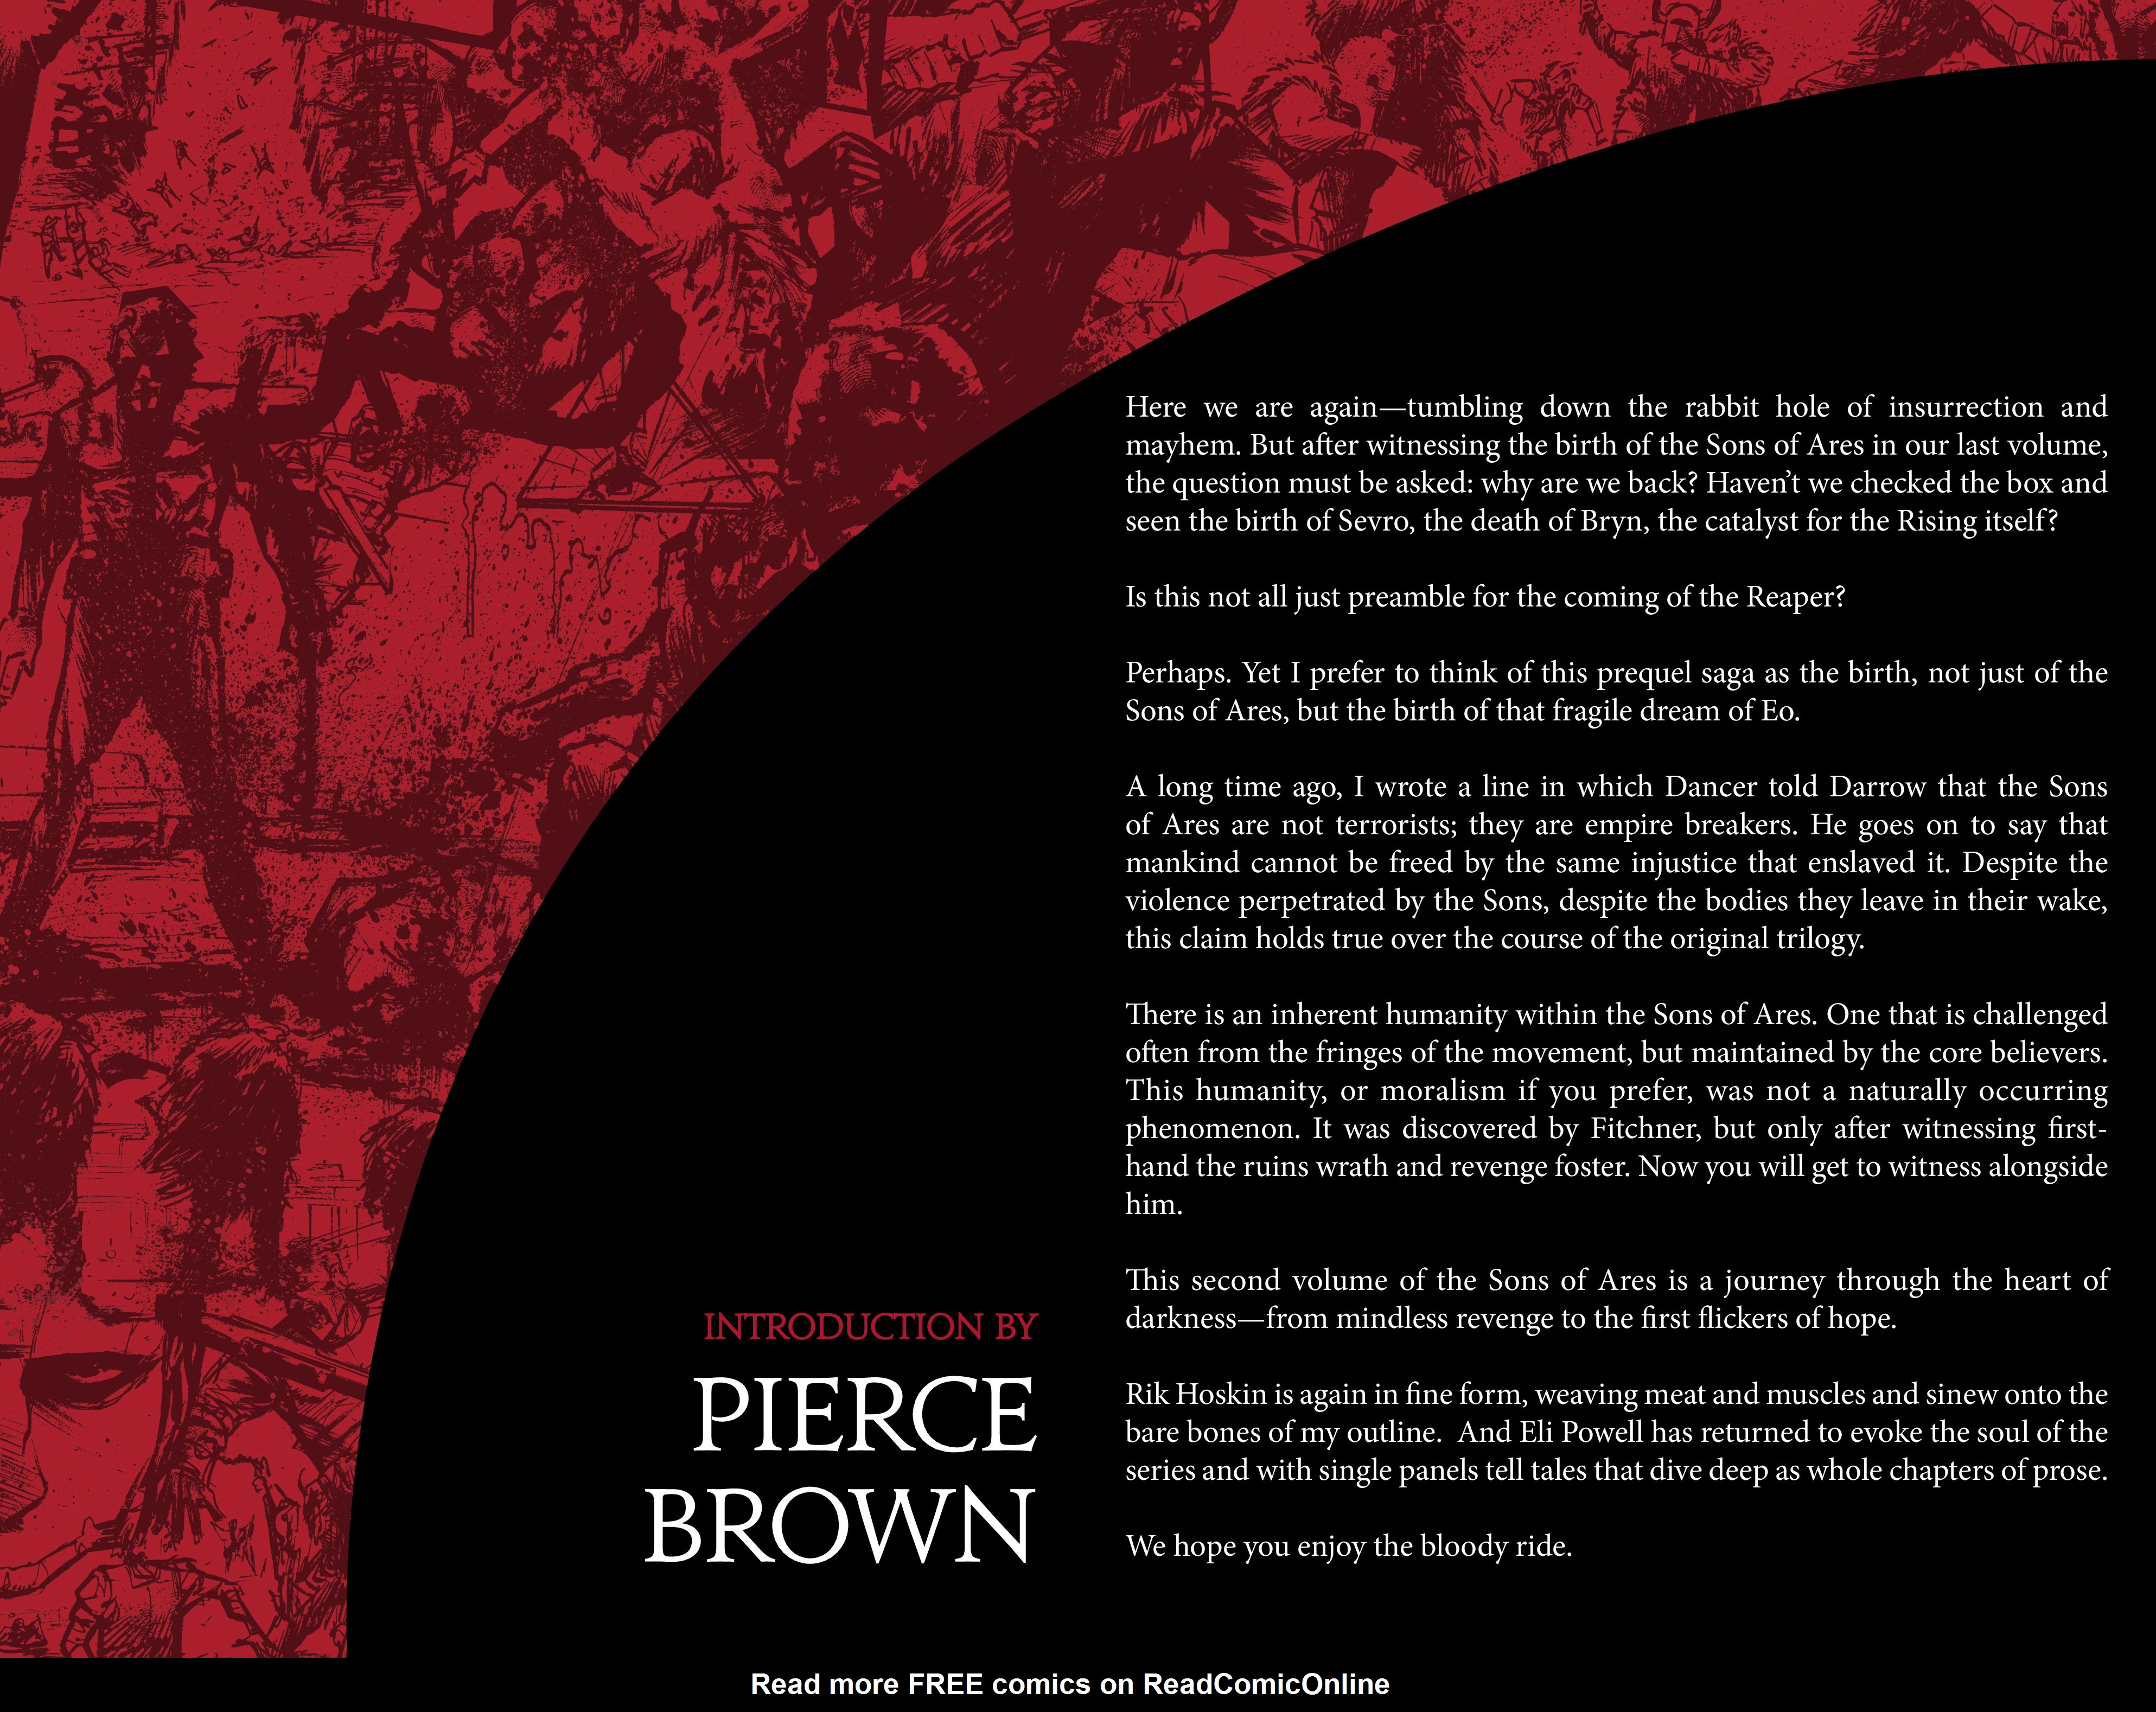 Read online Pierce Brown's Red Rising: Sons of Ares: Wrath comic -  Issue # TPB - 5